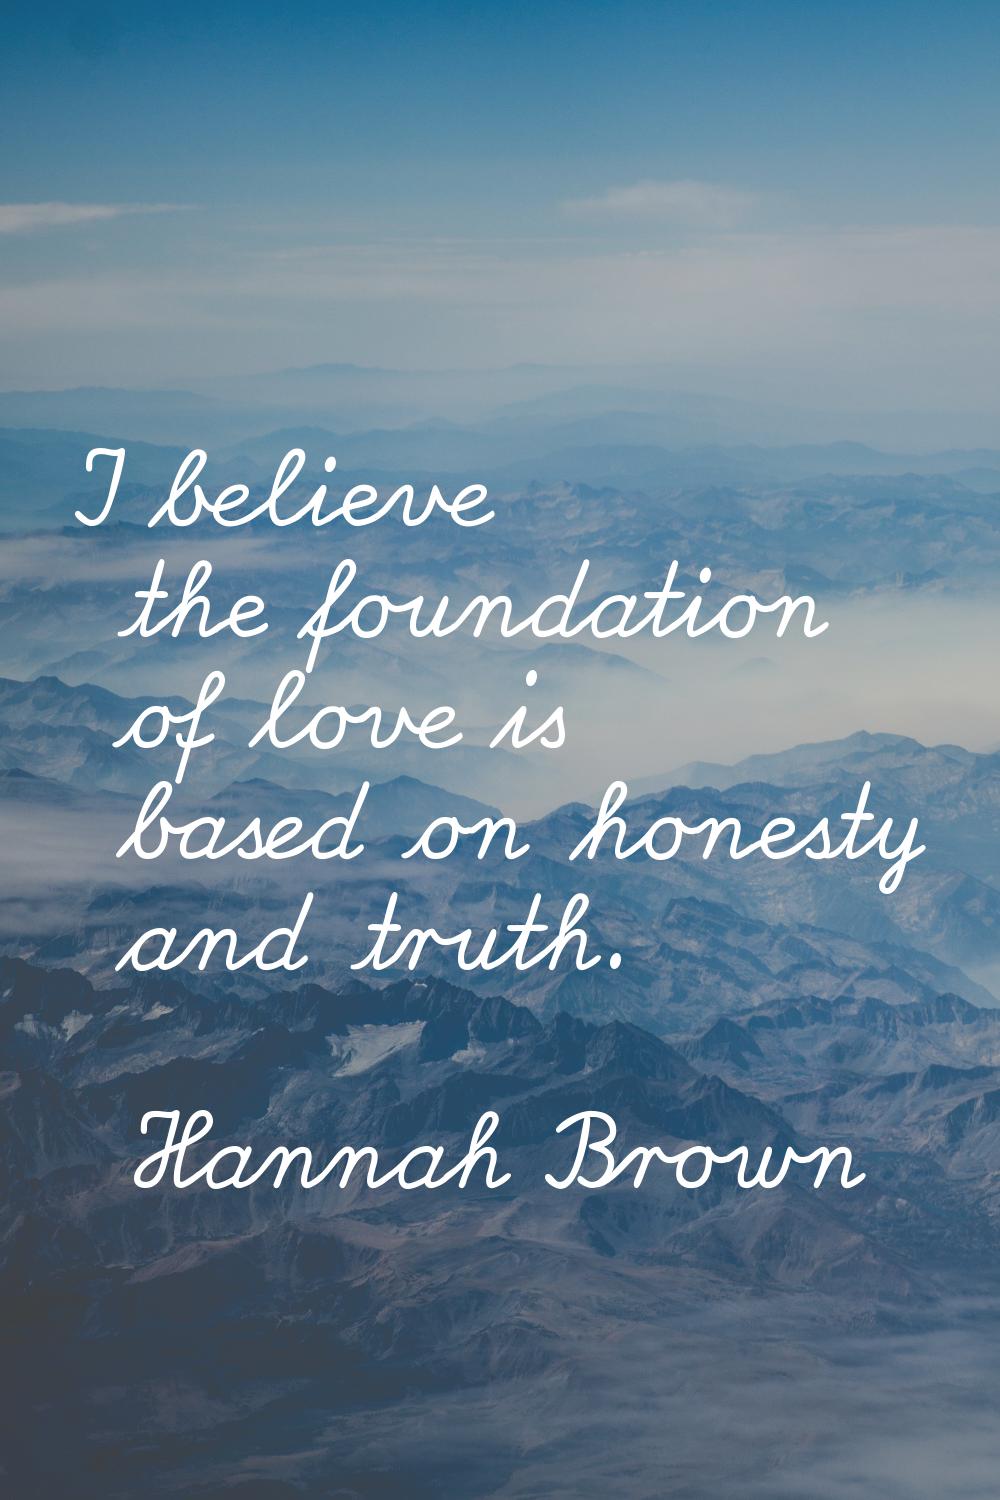 I believe the foundation of love is based on honesty and truth.